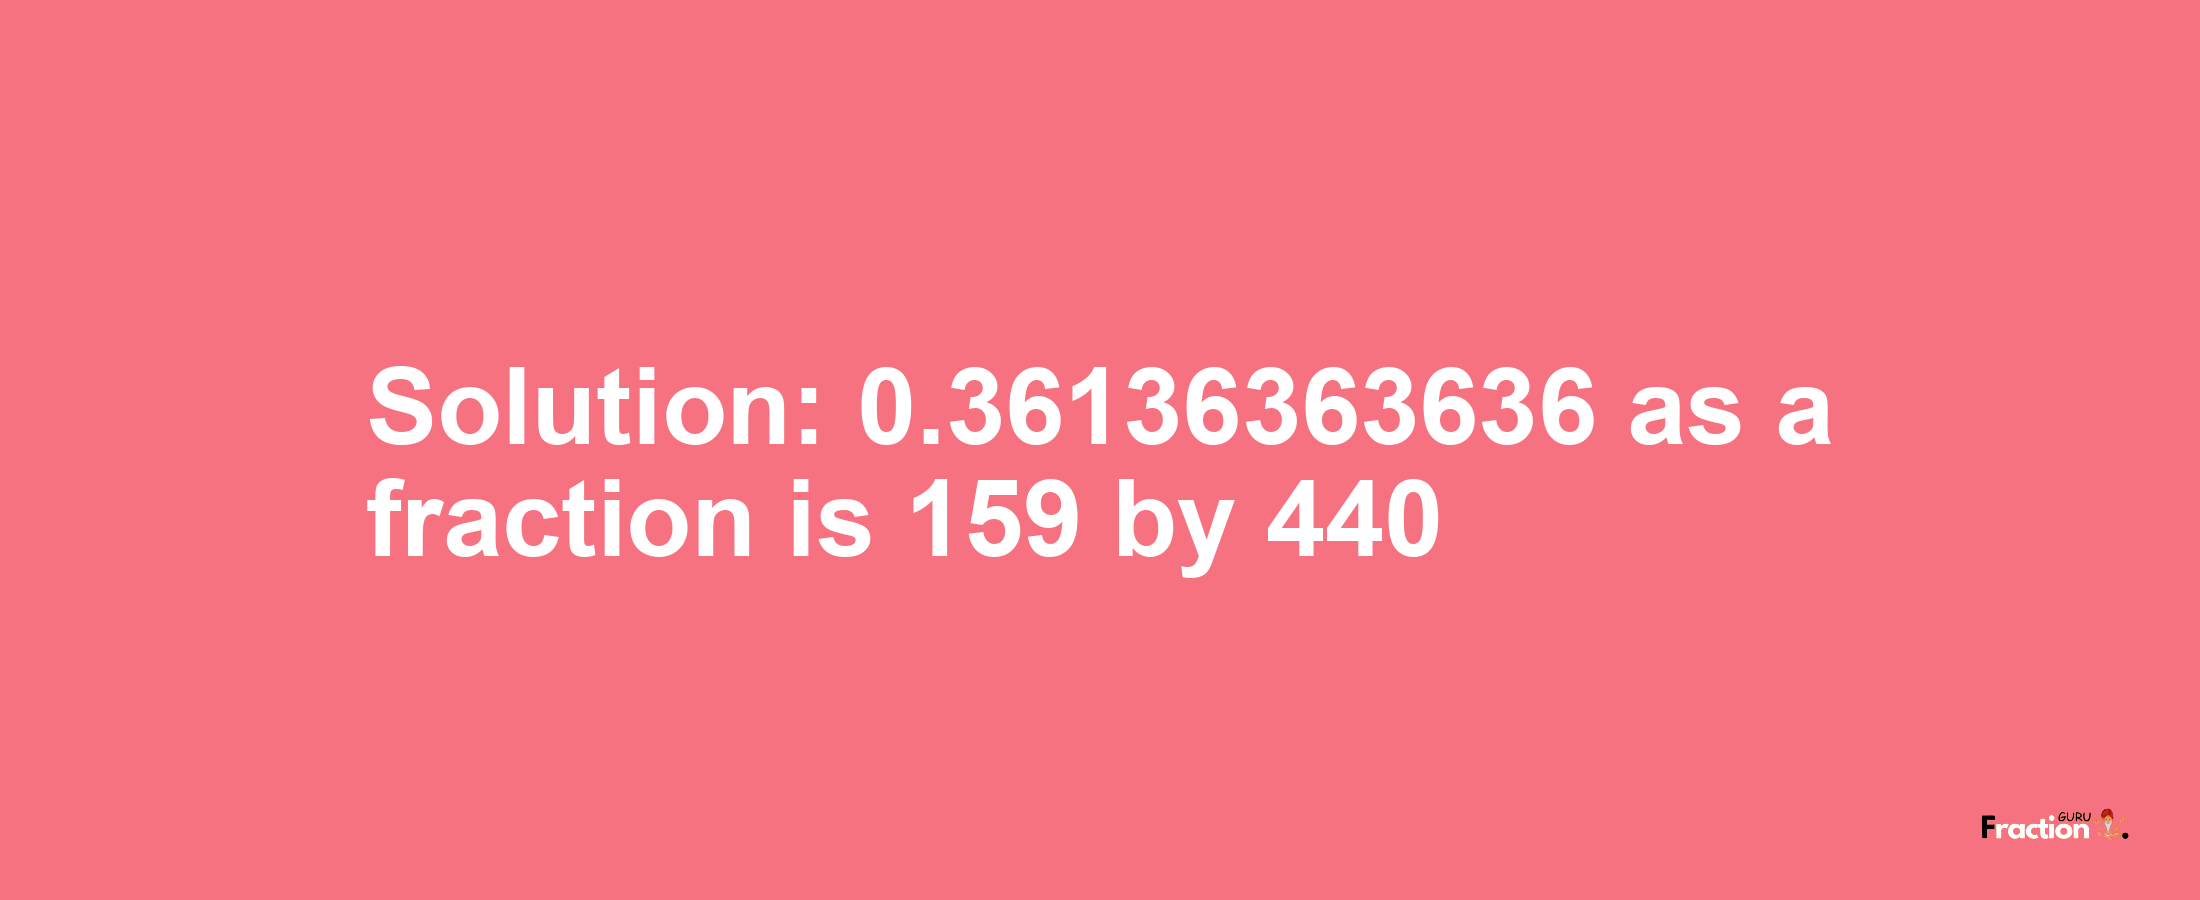 Solution:0.36136363636 as a fraction is 159/440